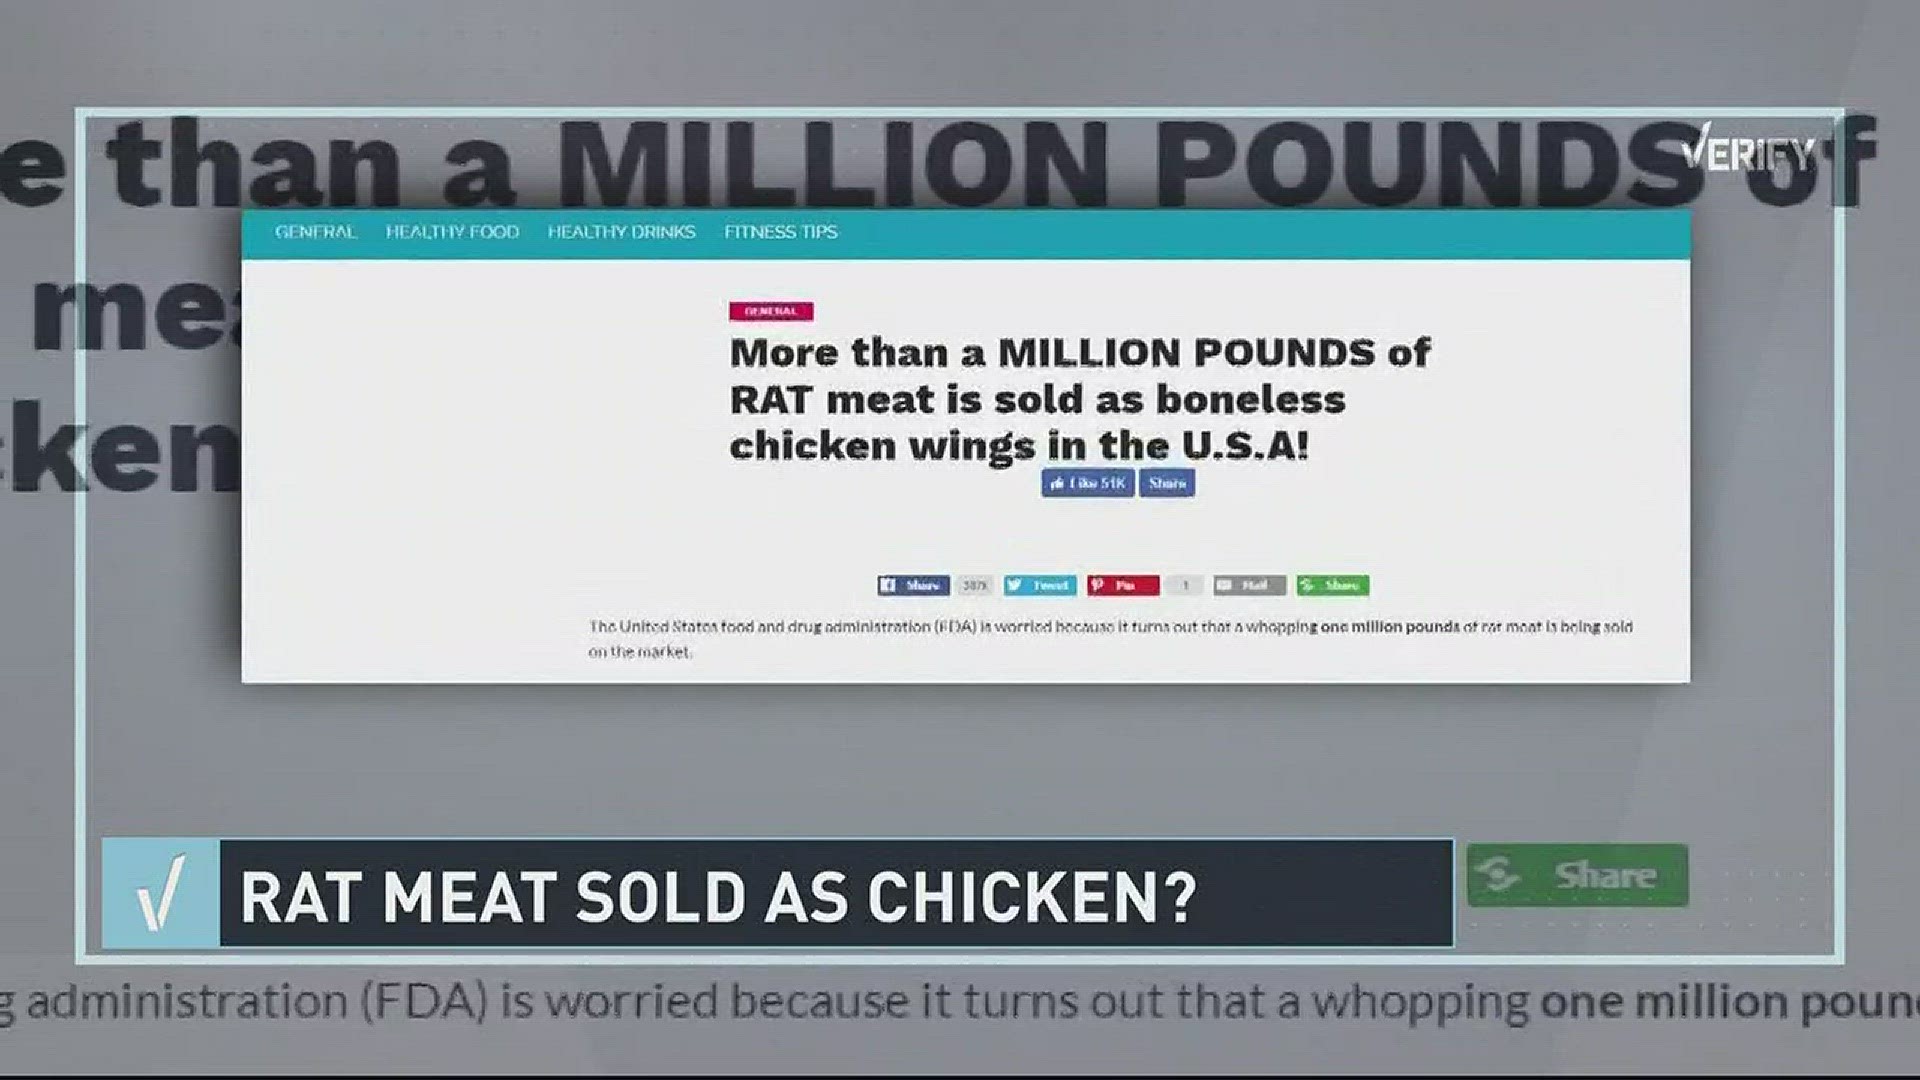 WUSA9 News contacted the Food and Drug Administration to ask if it is true that over one million rat meat is sold in the form of boneless chicken wings that is then served in restaurants.